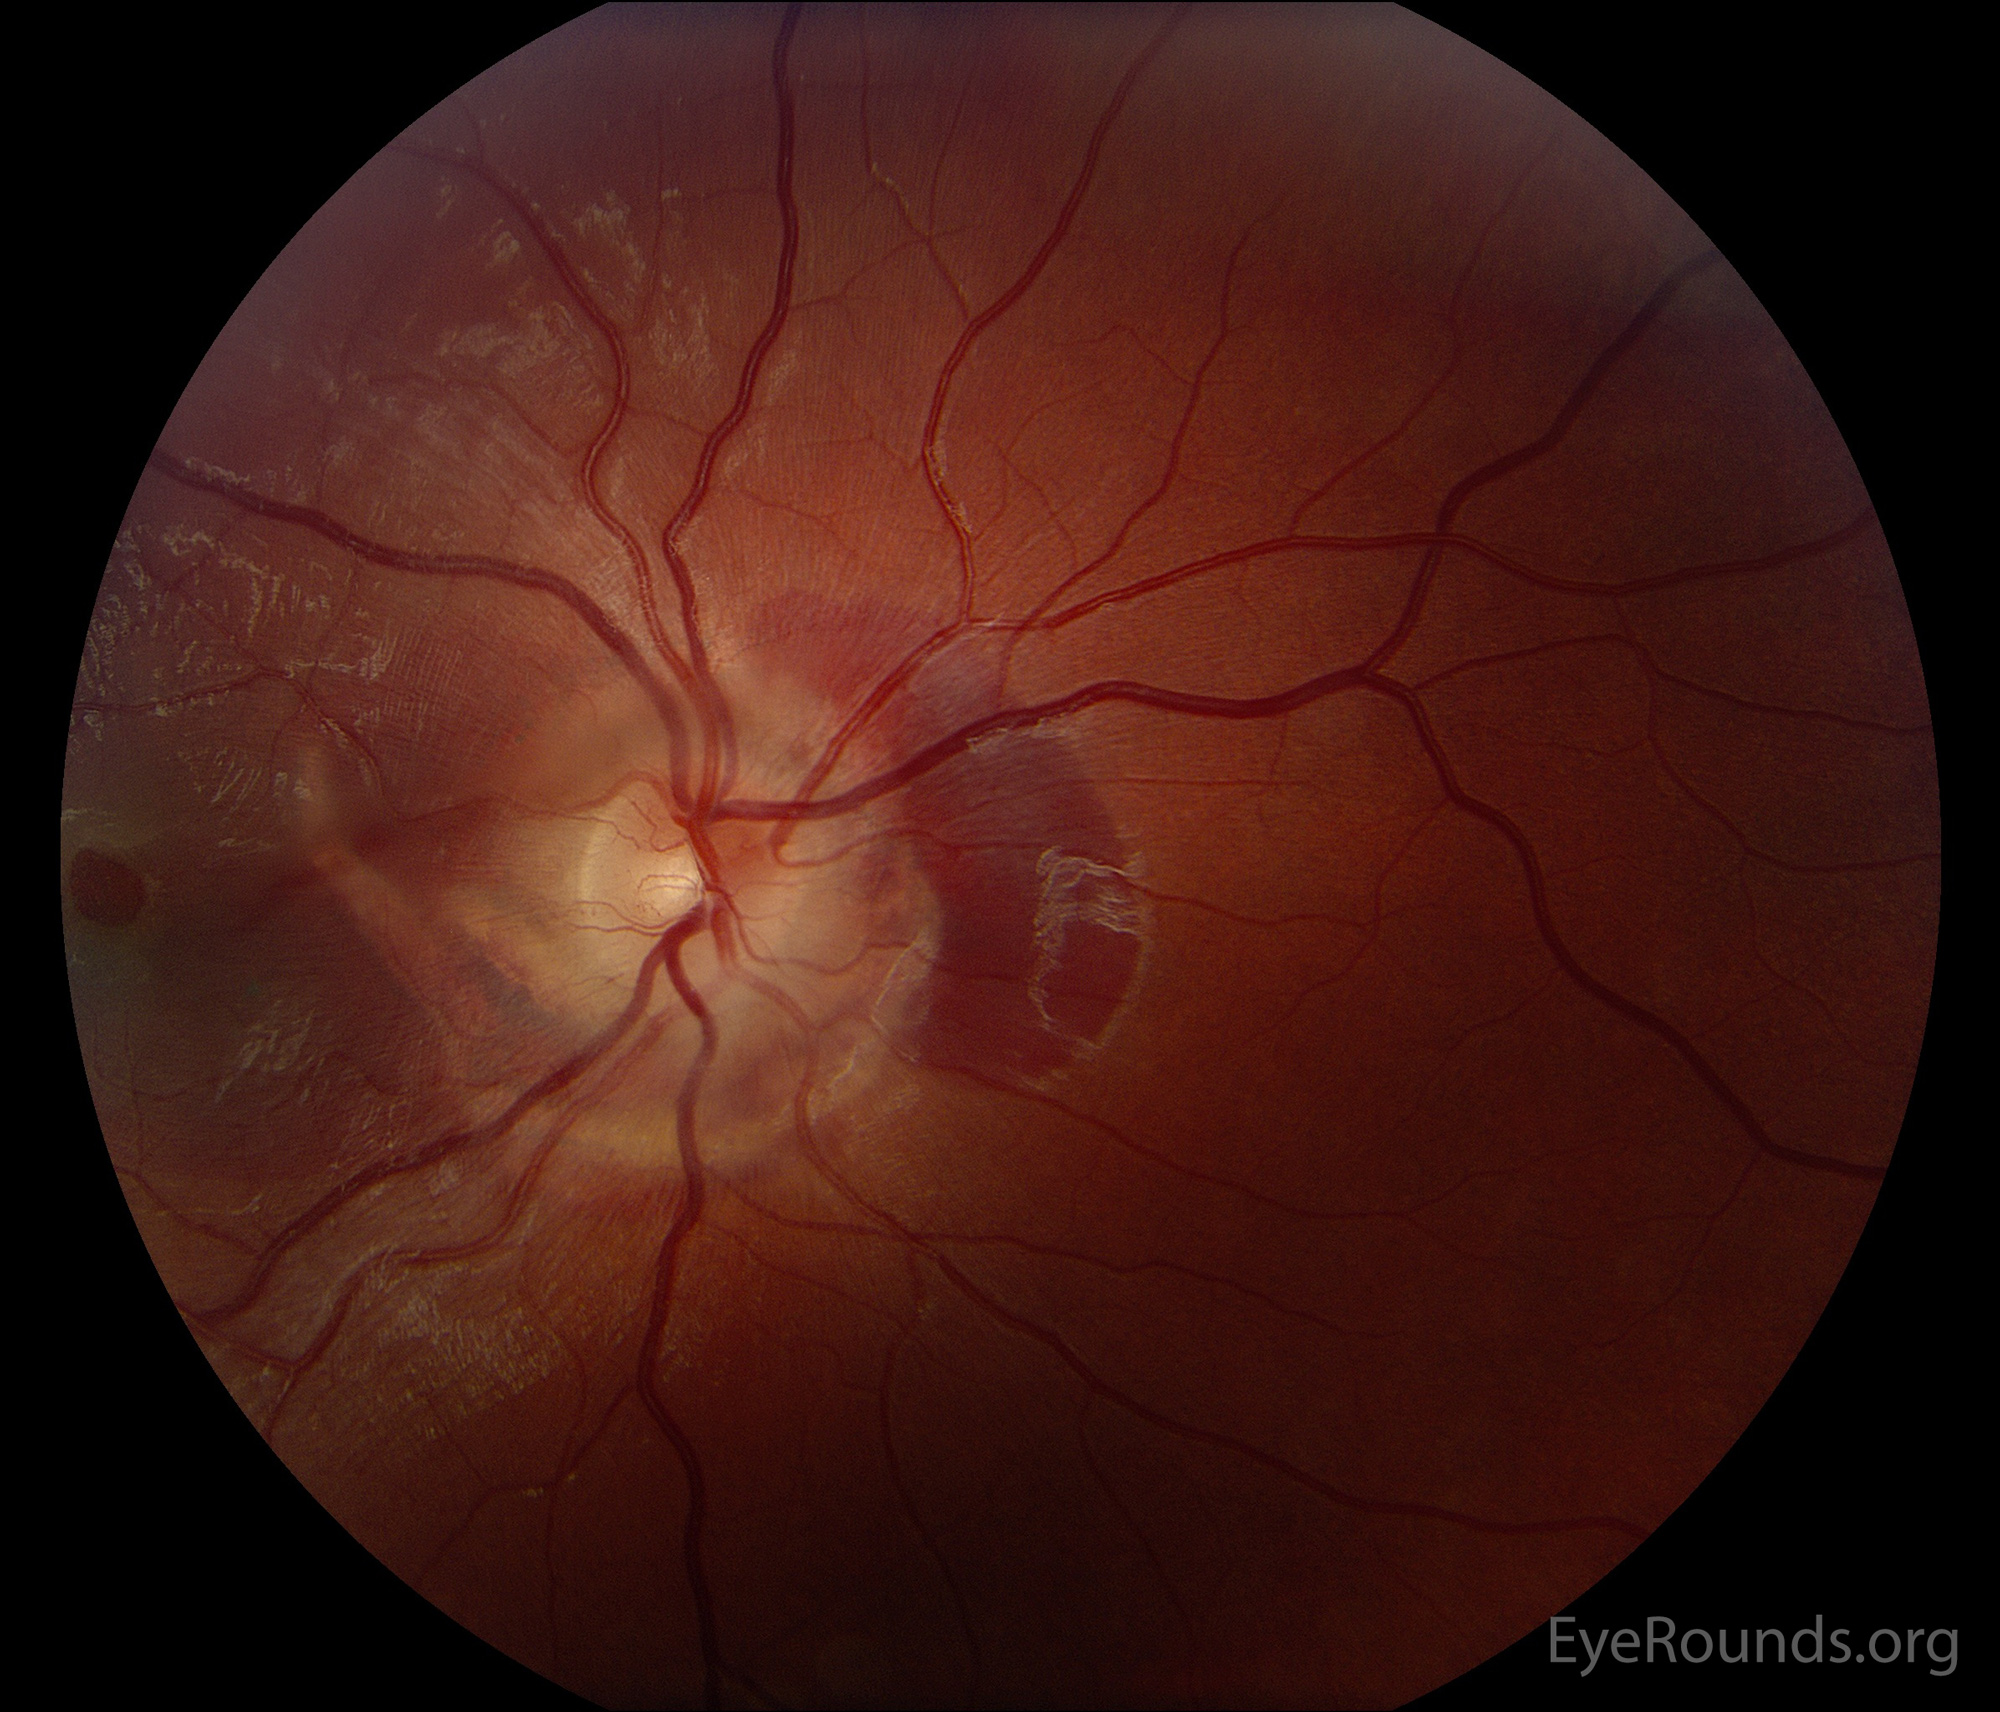  Color fundus photograph of the right eye shows a macular hole and peripapillary choroidal ruptures extending into the macula